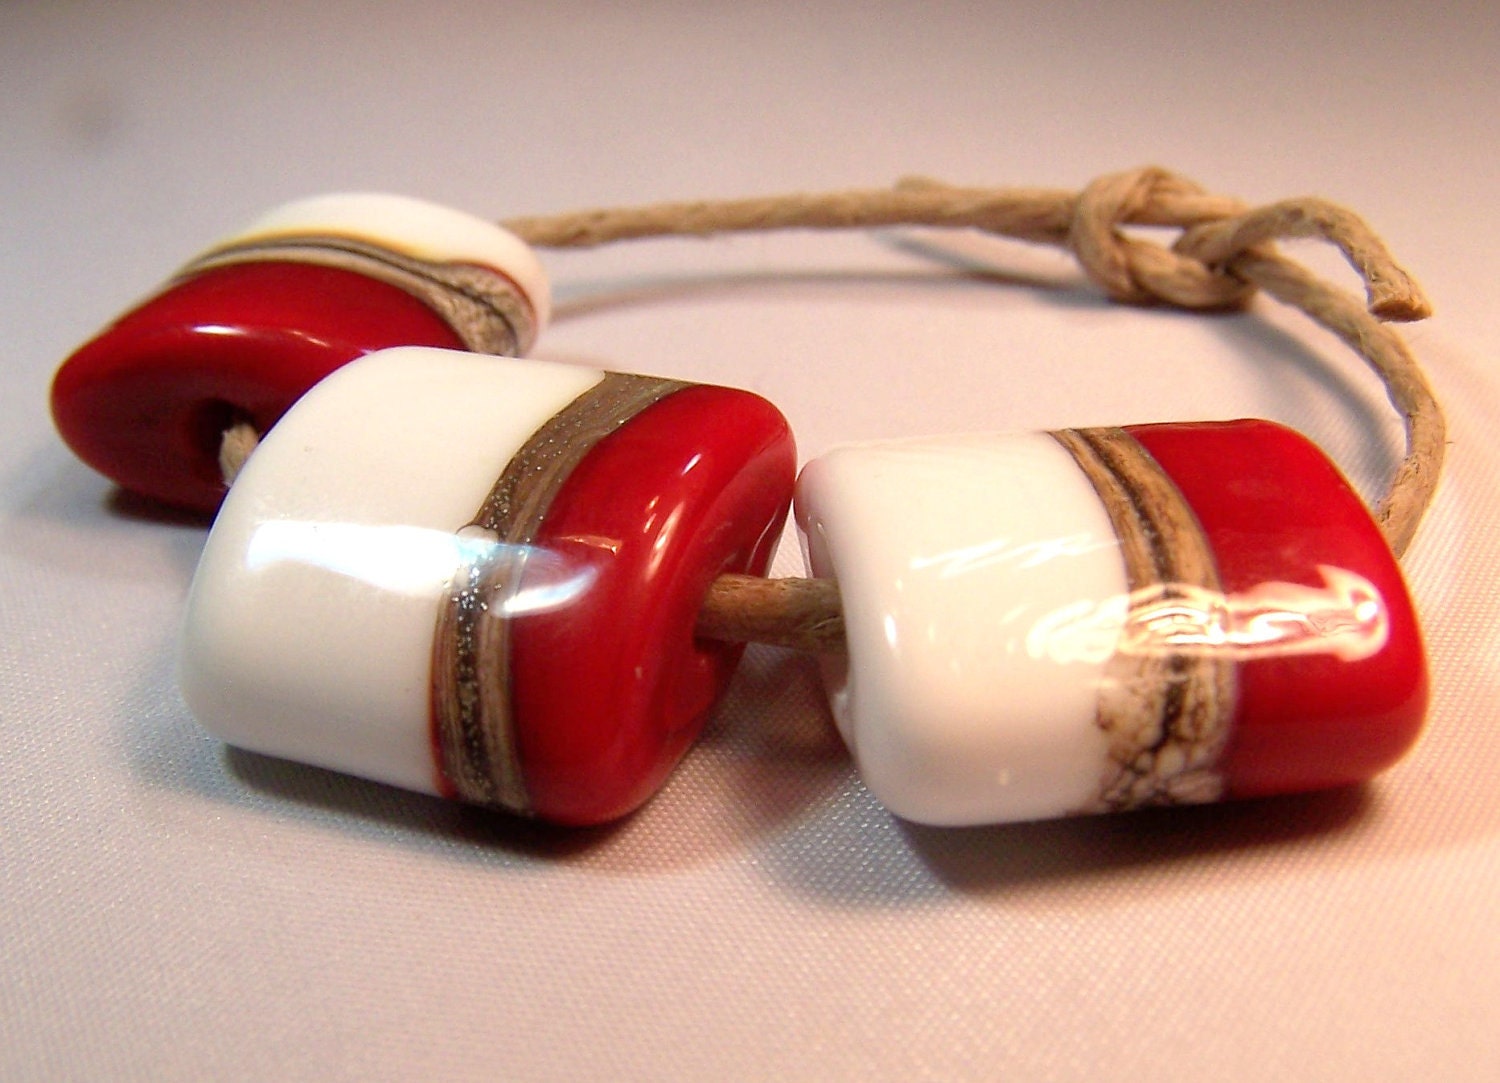 Red and White Handmade Lampwork Glass Beads - Pillow Shaped Lampwork Bead Set